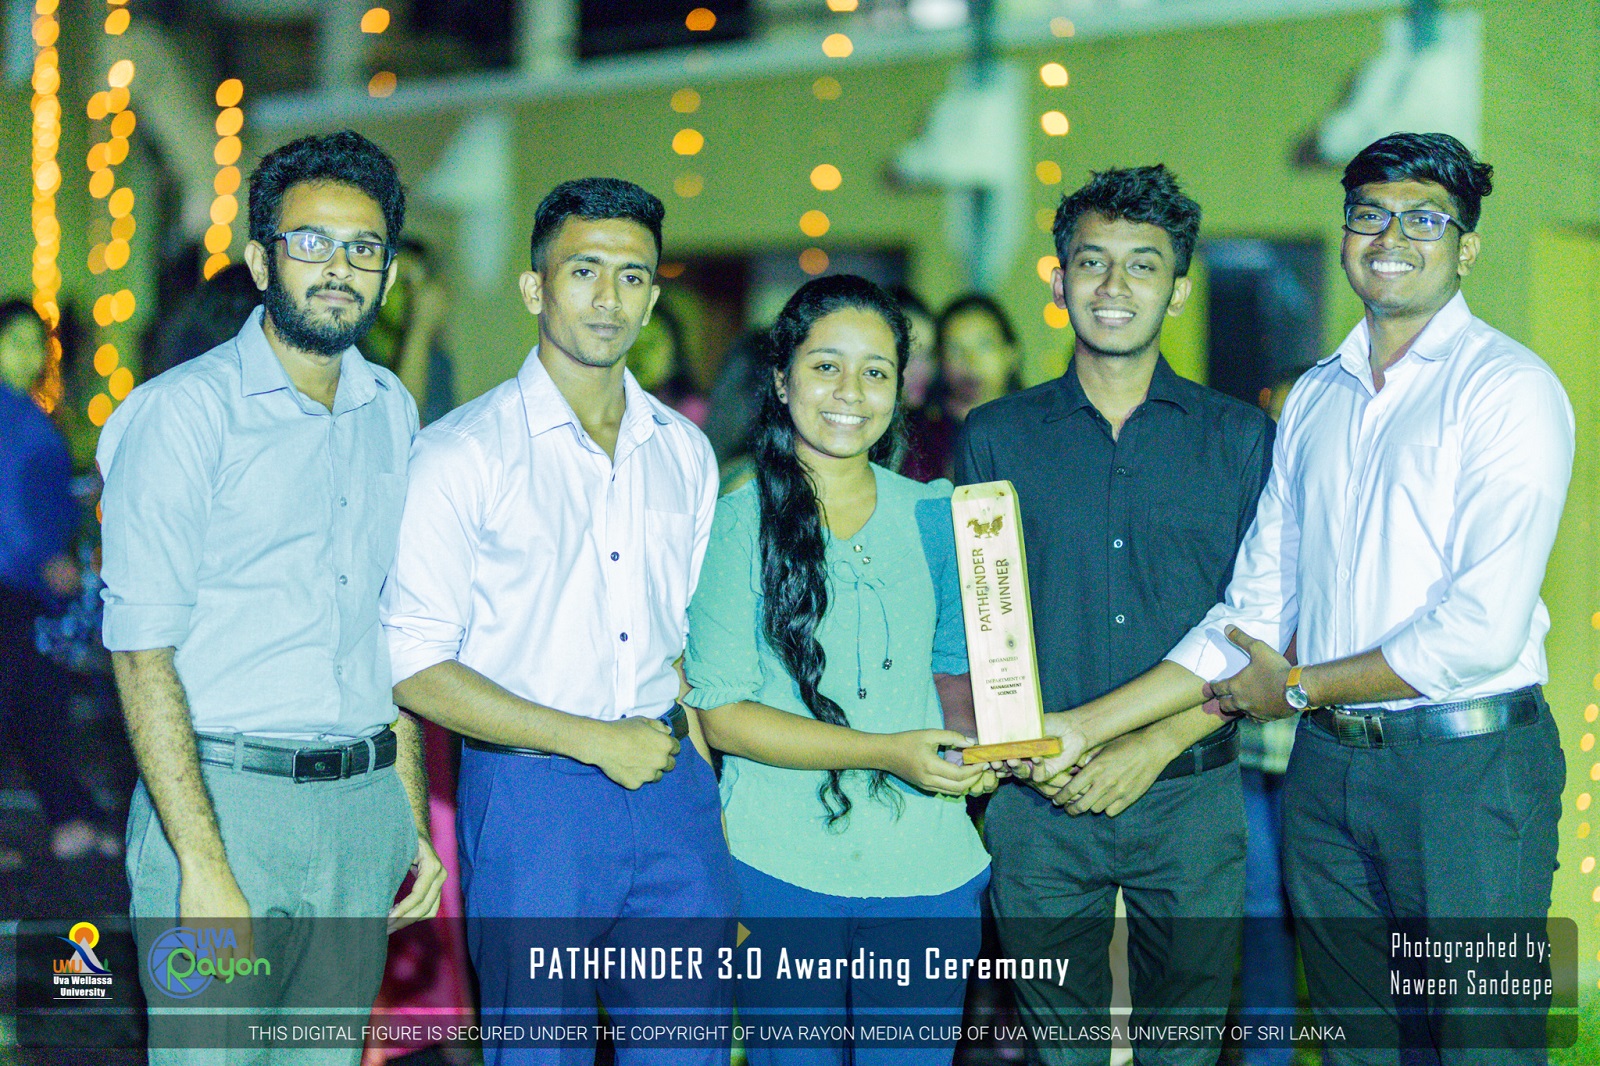 Congratulations !!! First Place Winning Team under the “Best Marketing” category at Pathfinder 3.0